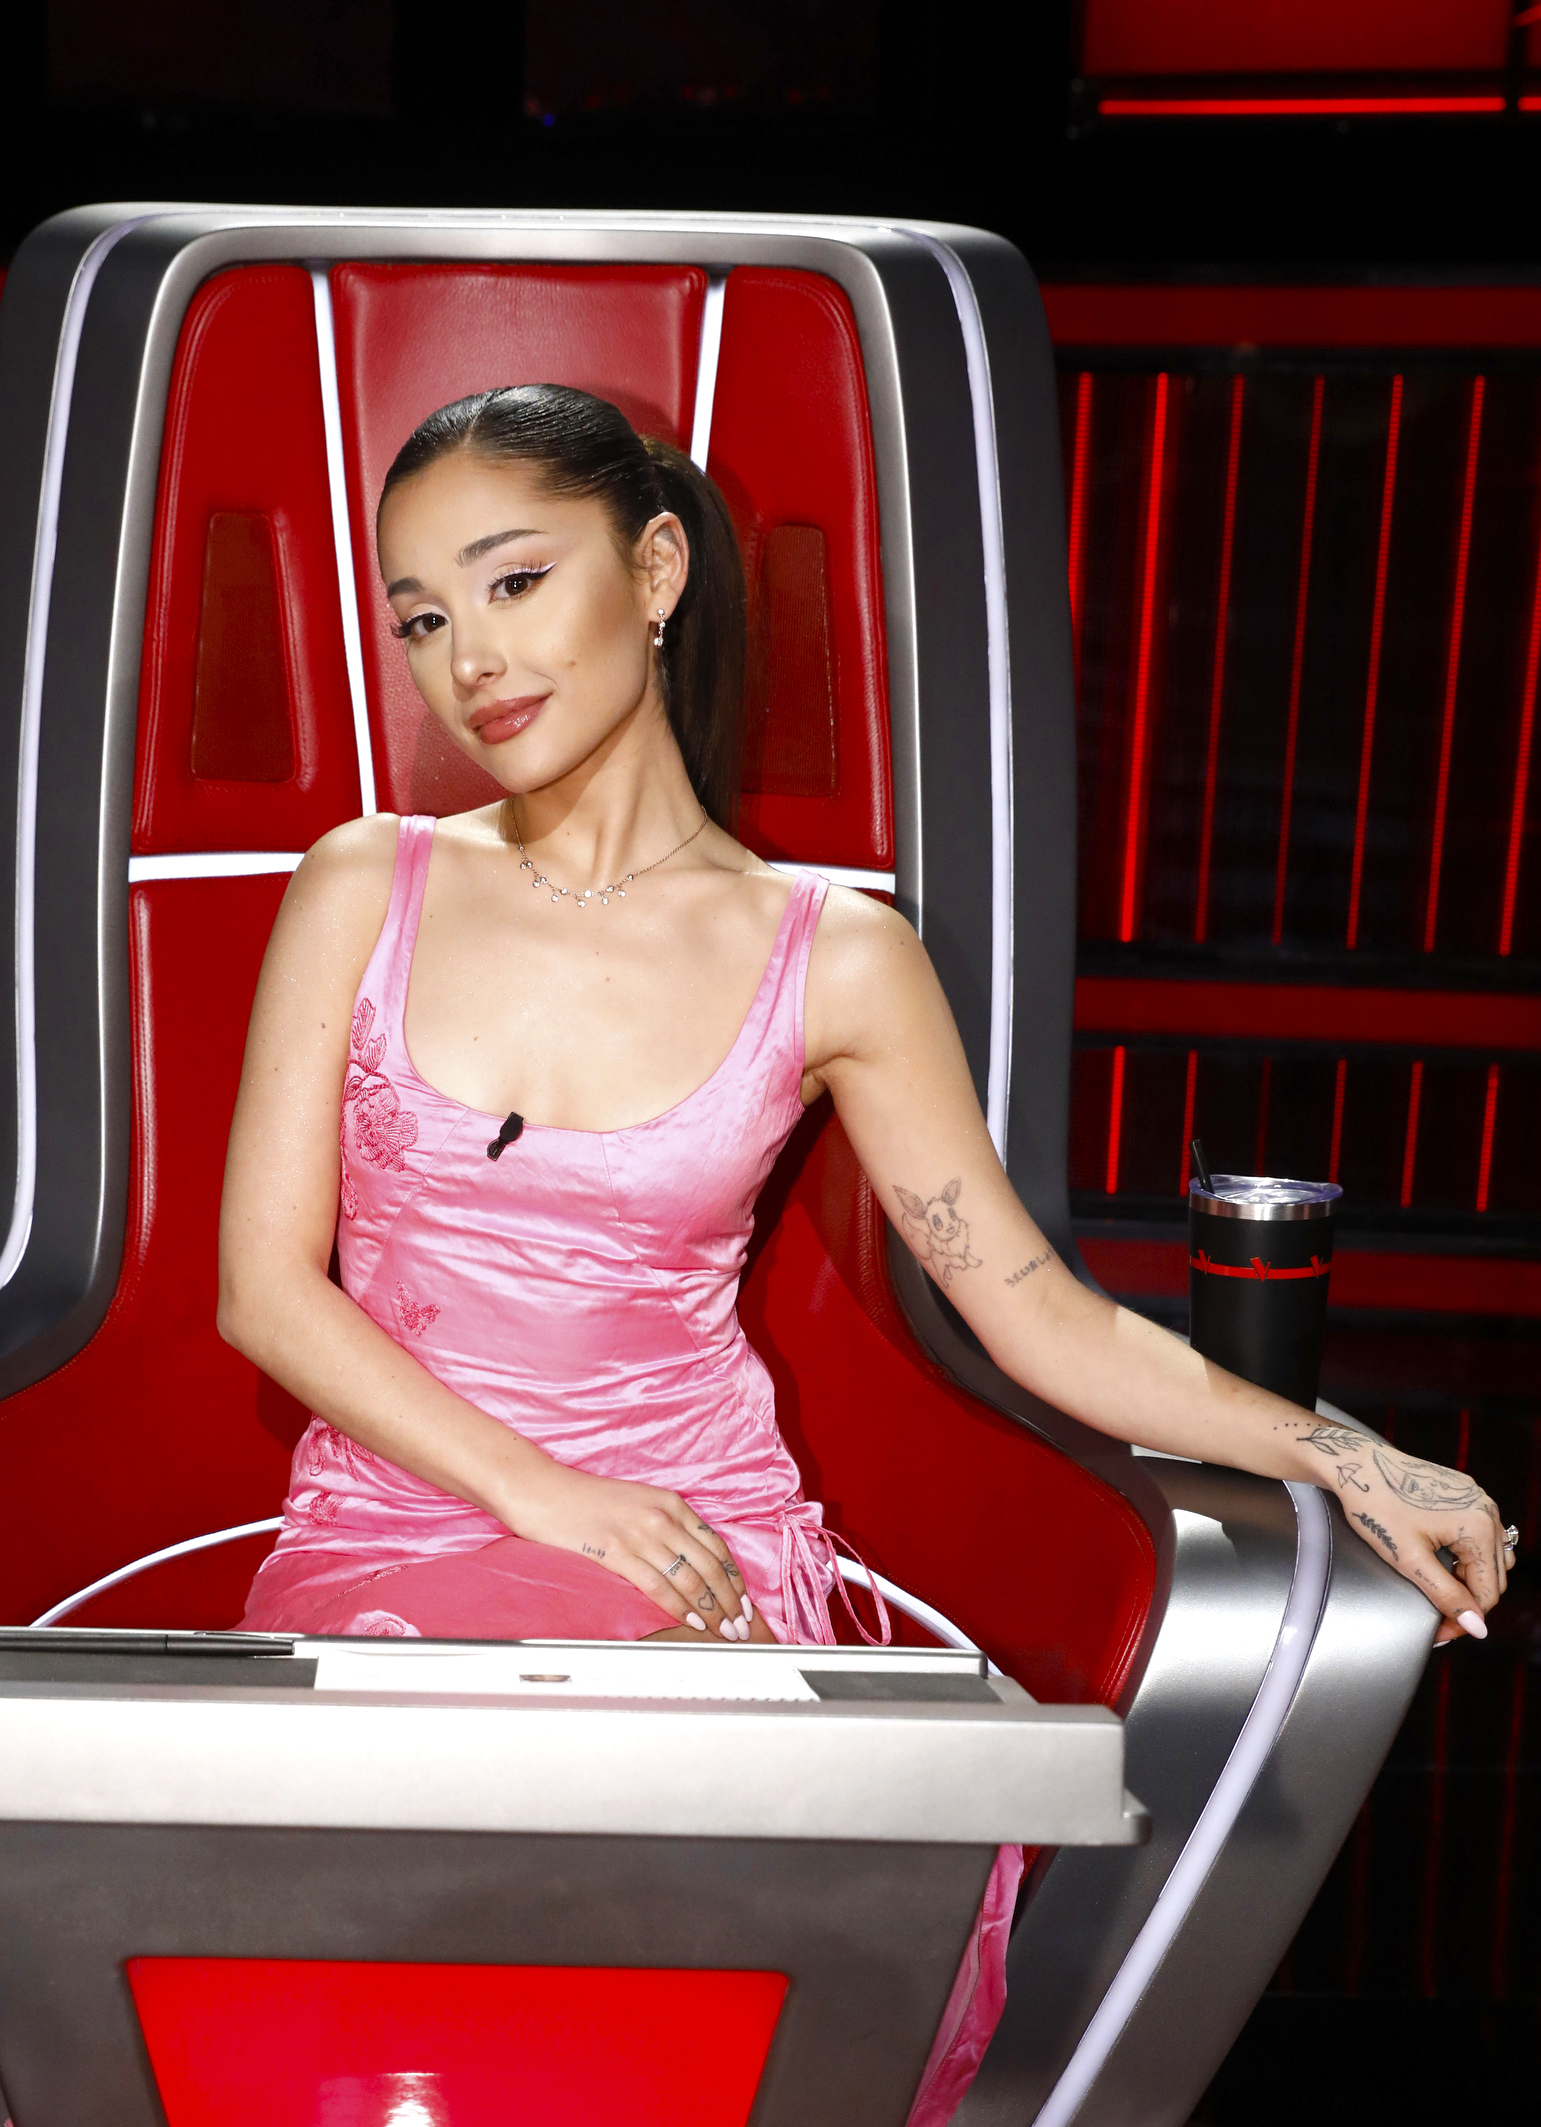 Ariana Grande on &quot;The Voice&quot;